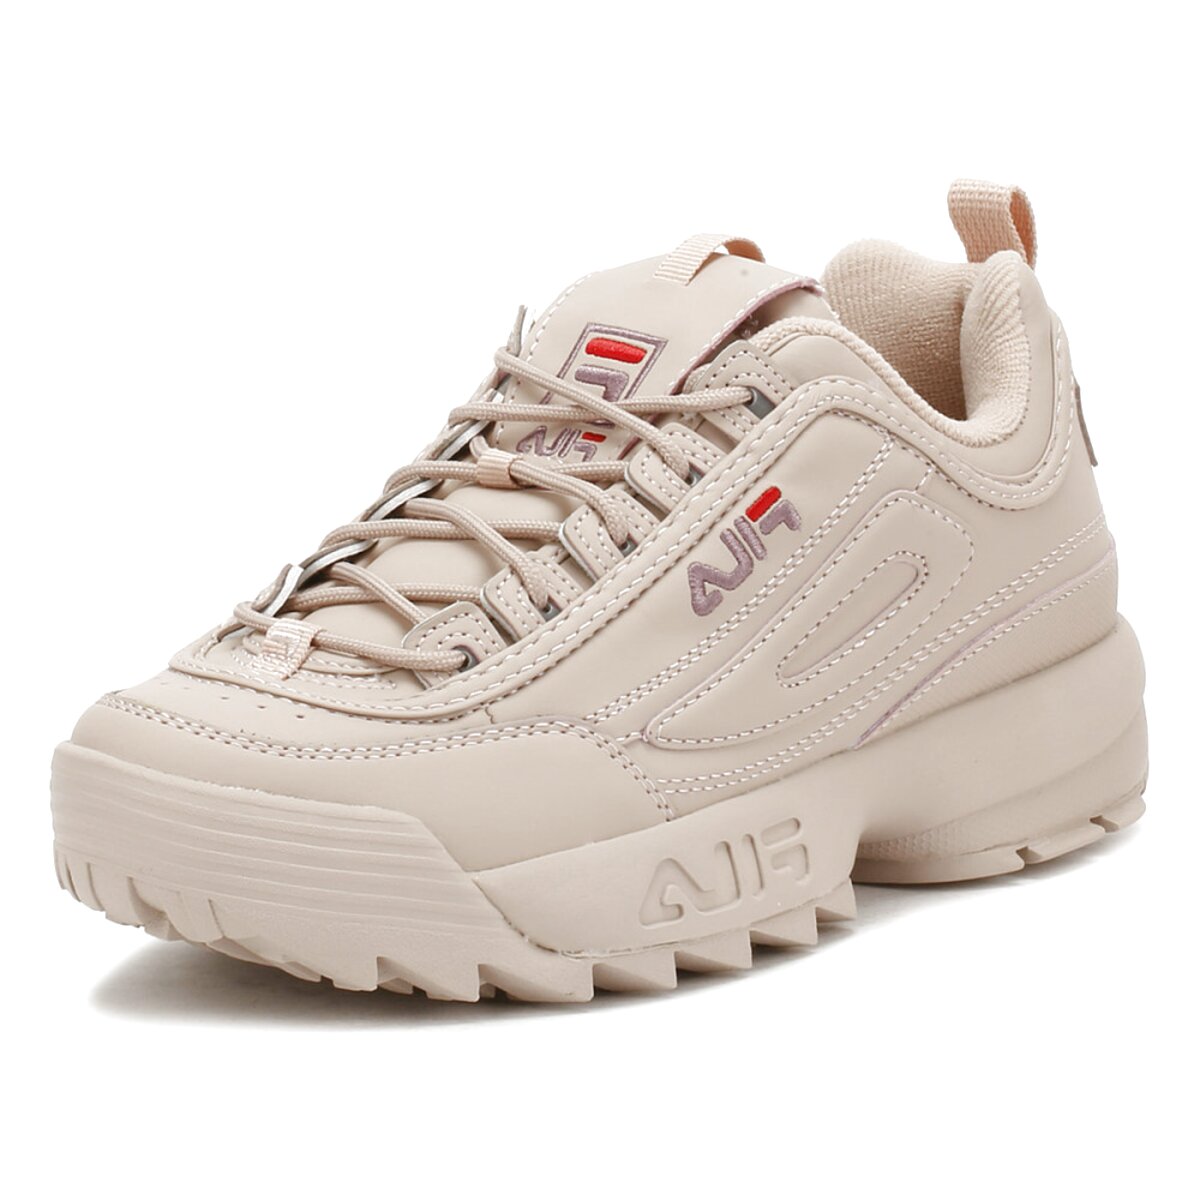 Womens Fila Trainers for sale in UK | 60 used Womens Fila Trainers